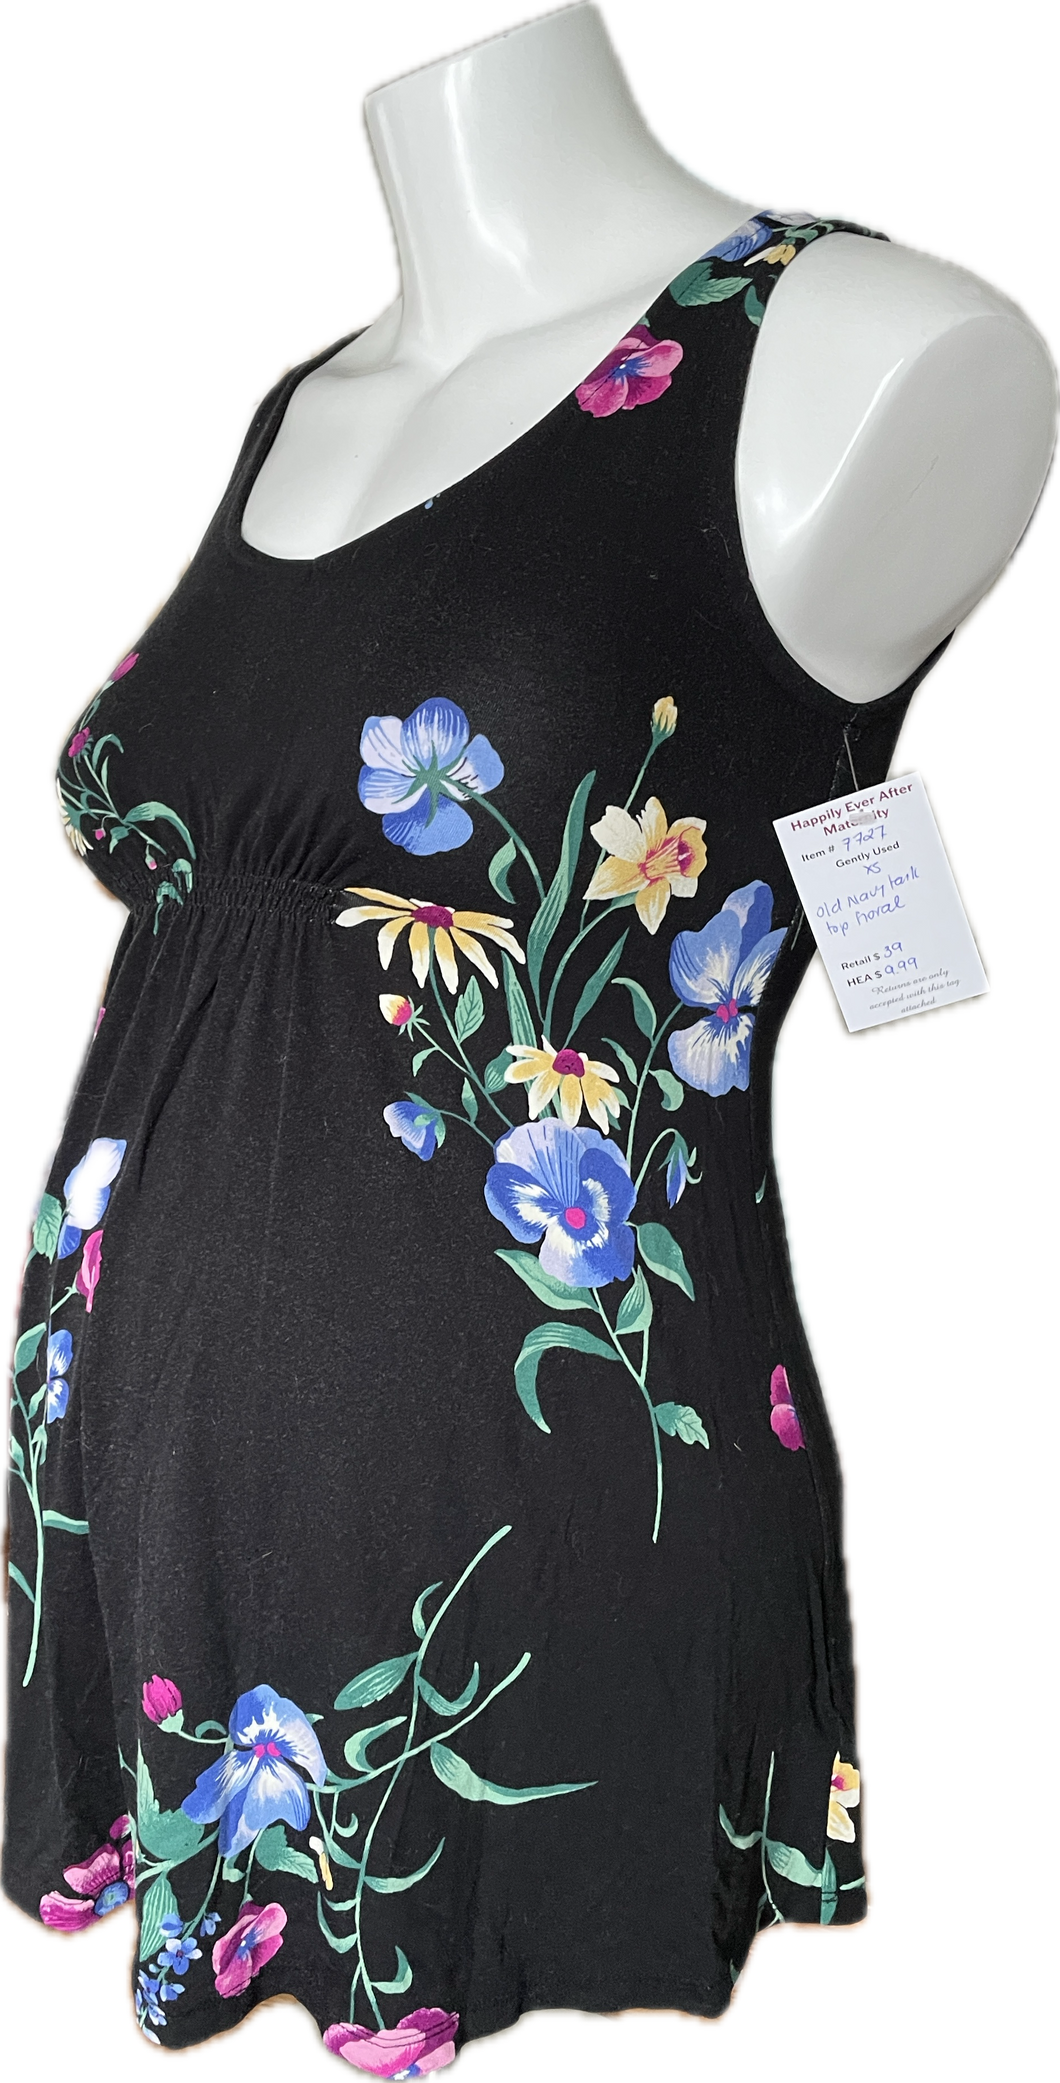 XS Old Navy Maternity Tank Top in Floral Print